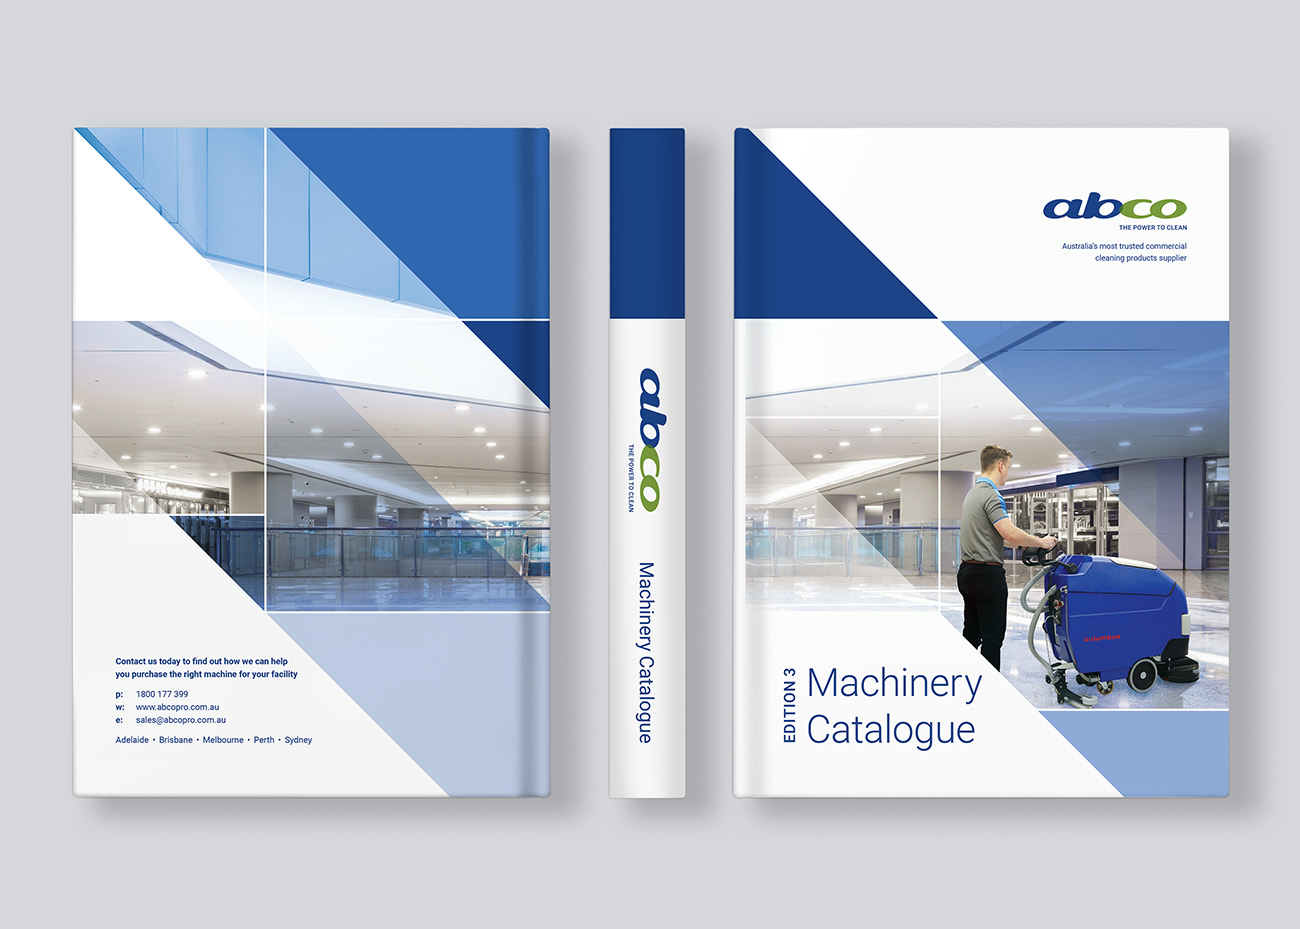 Abco machinery catalogue - complete cover